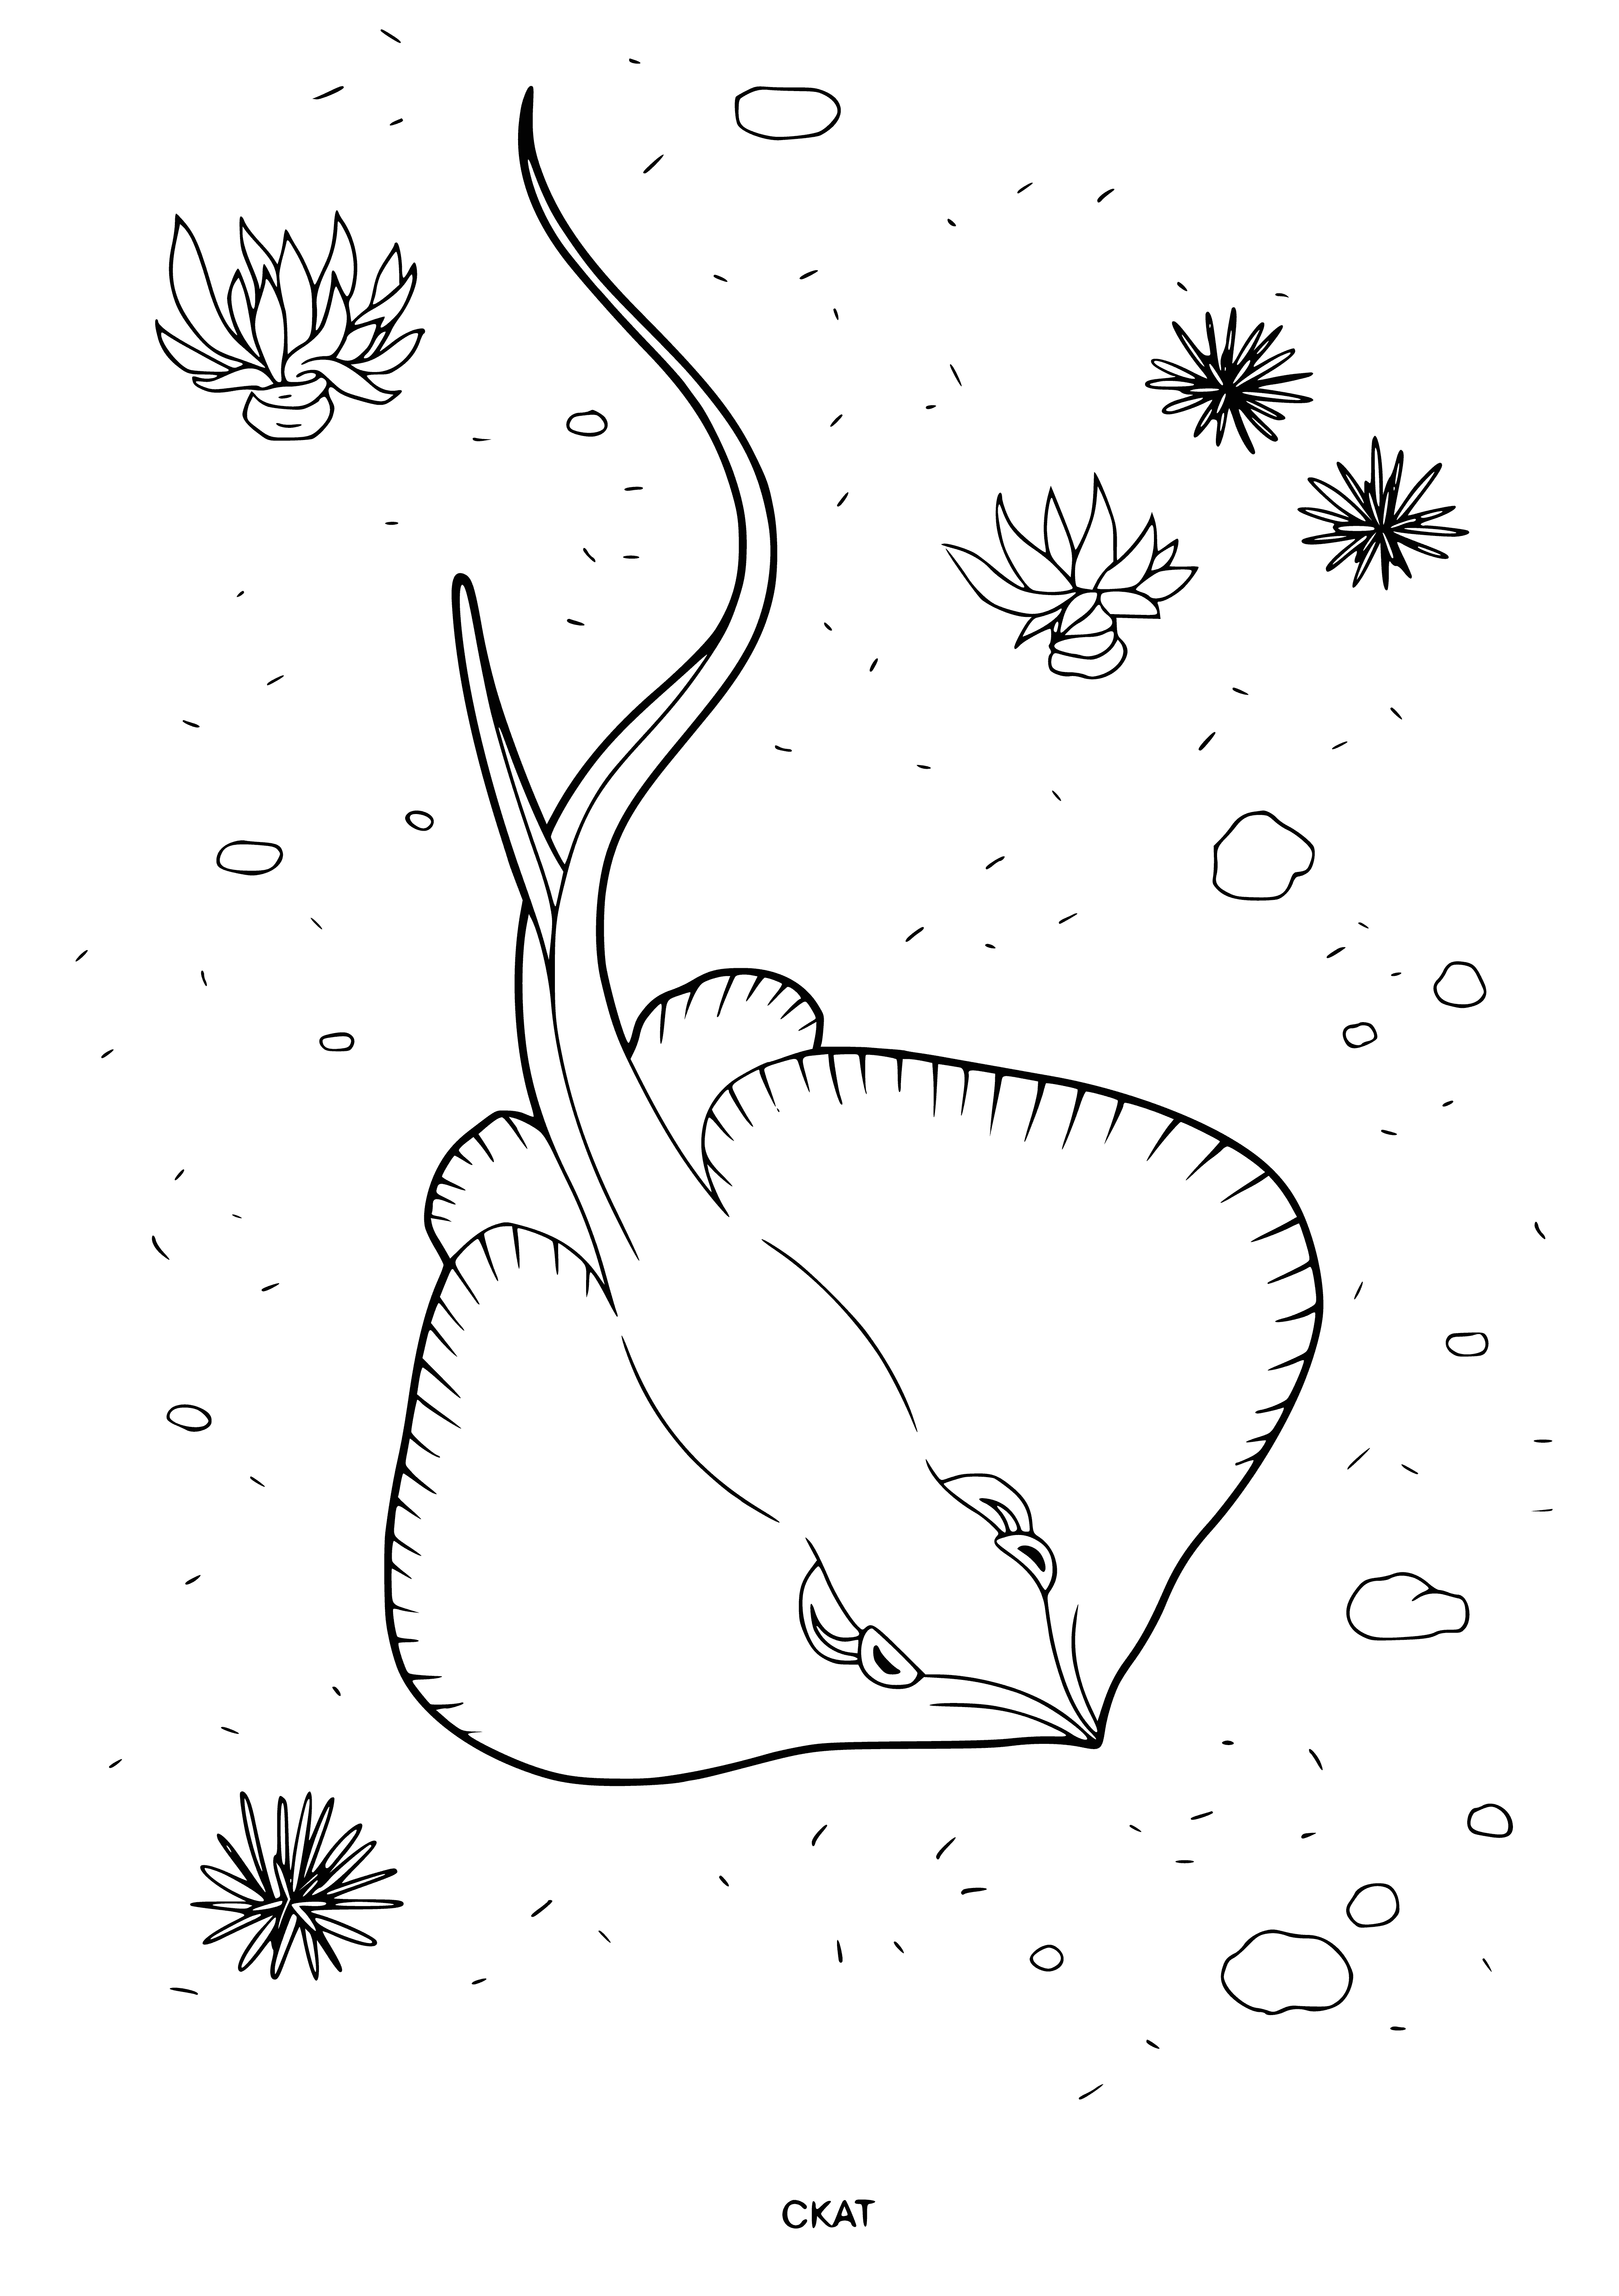 coloring page: Two scats: one brown, one black, both different sizes, on the ground in a coloring page.